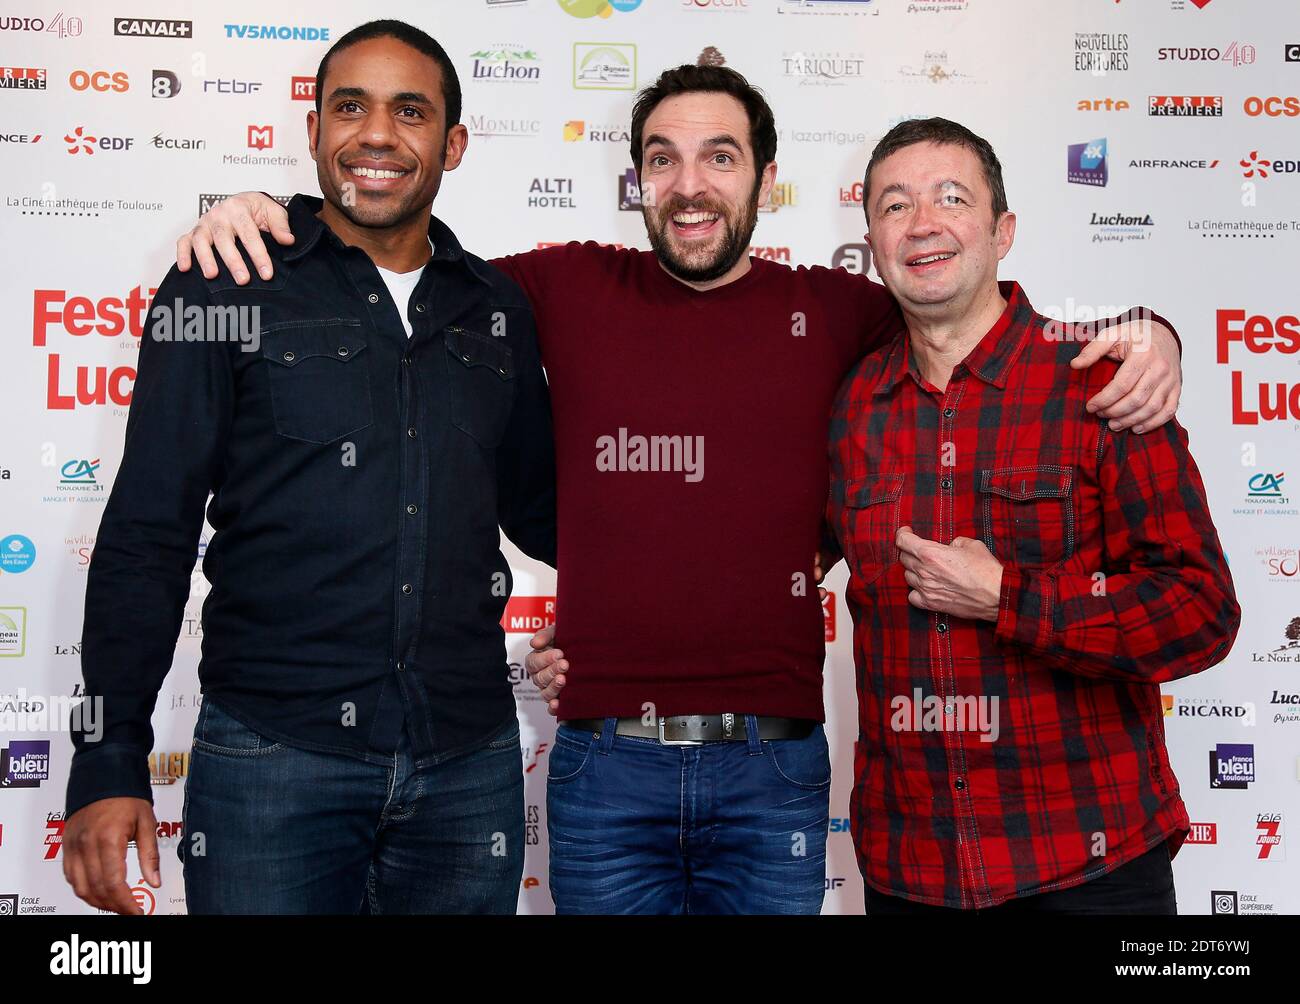 David Mora, Frederic Bouraly and Loup Denis Elion of Scenes de menage team attending the 16th Luchon International Television Film Festival in Luchon, French Pyrenees, France on February 14, 2014. Photo by Patrick Bernard/ABACAPRESS.COM Stock Photo